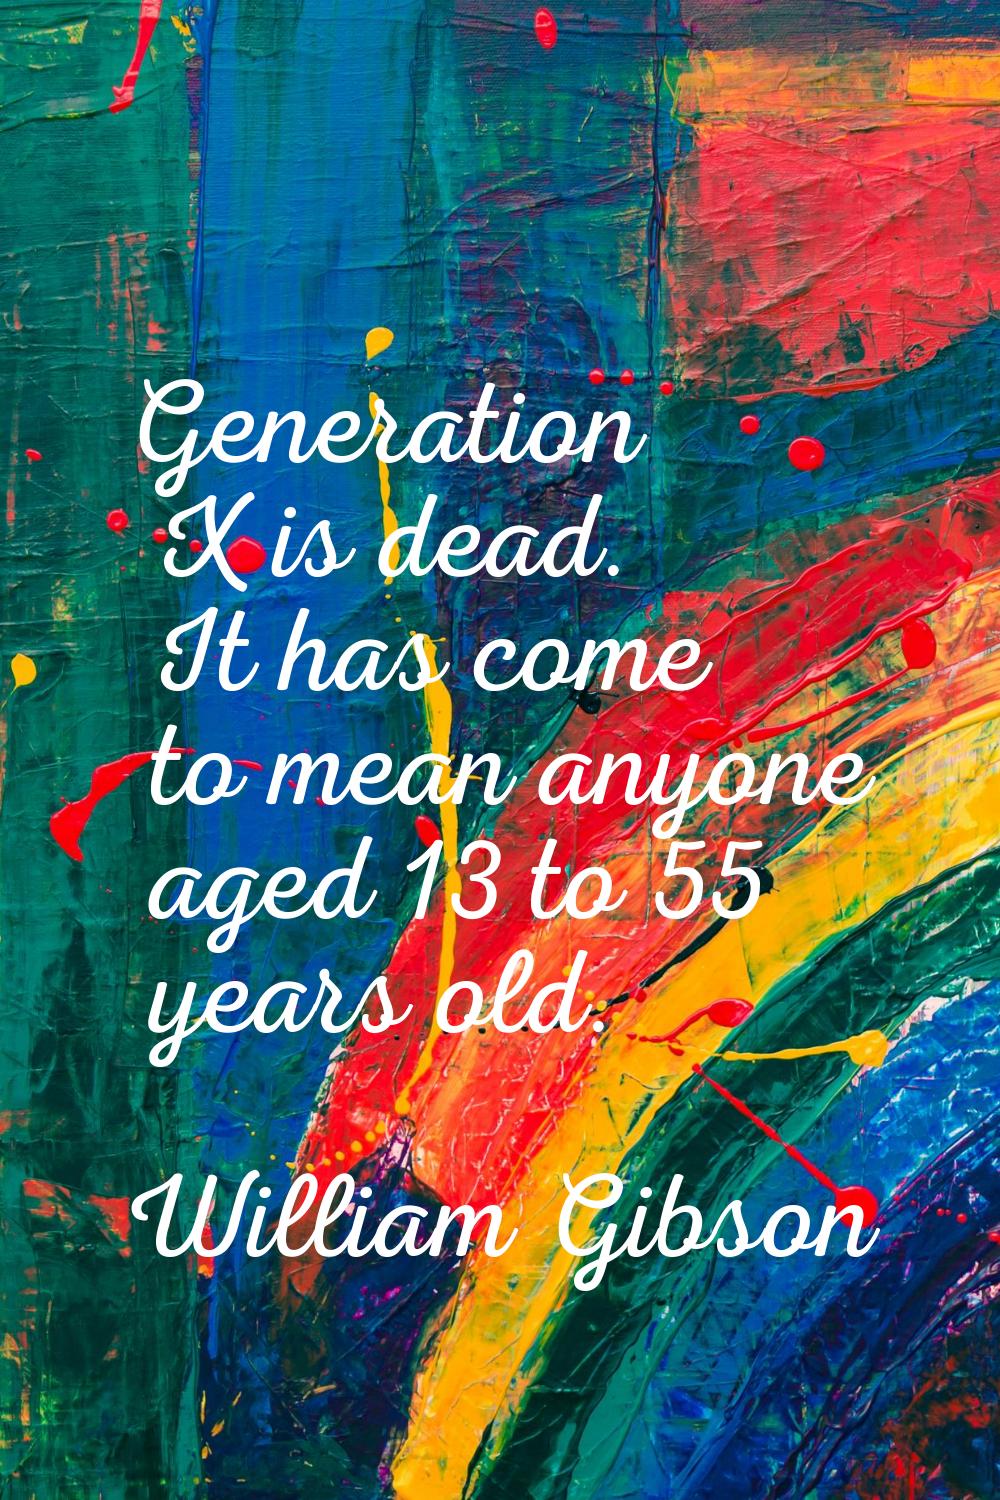 Generation X is dead. It has come to mean anyone aged 13 to 55 years old.